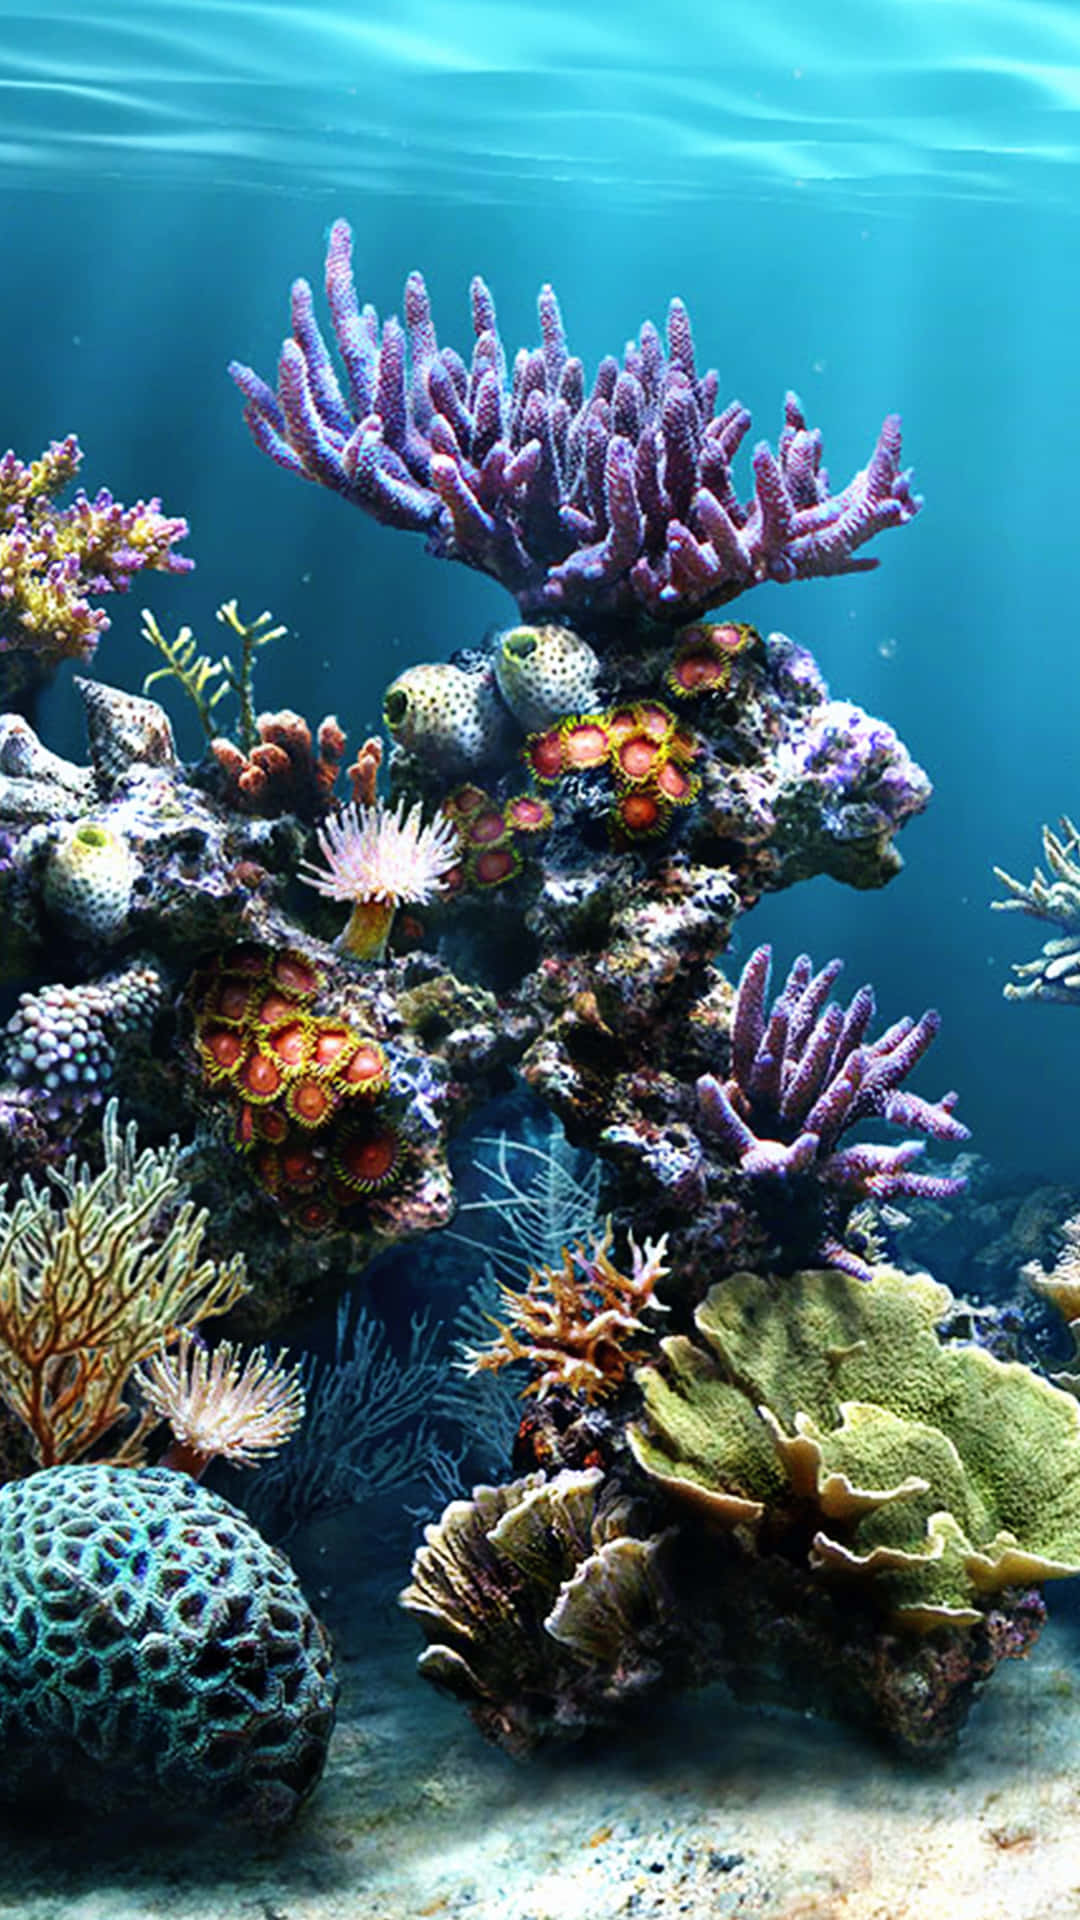 Experience the beauty of a coral reef like never before